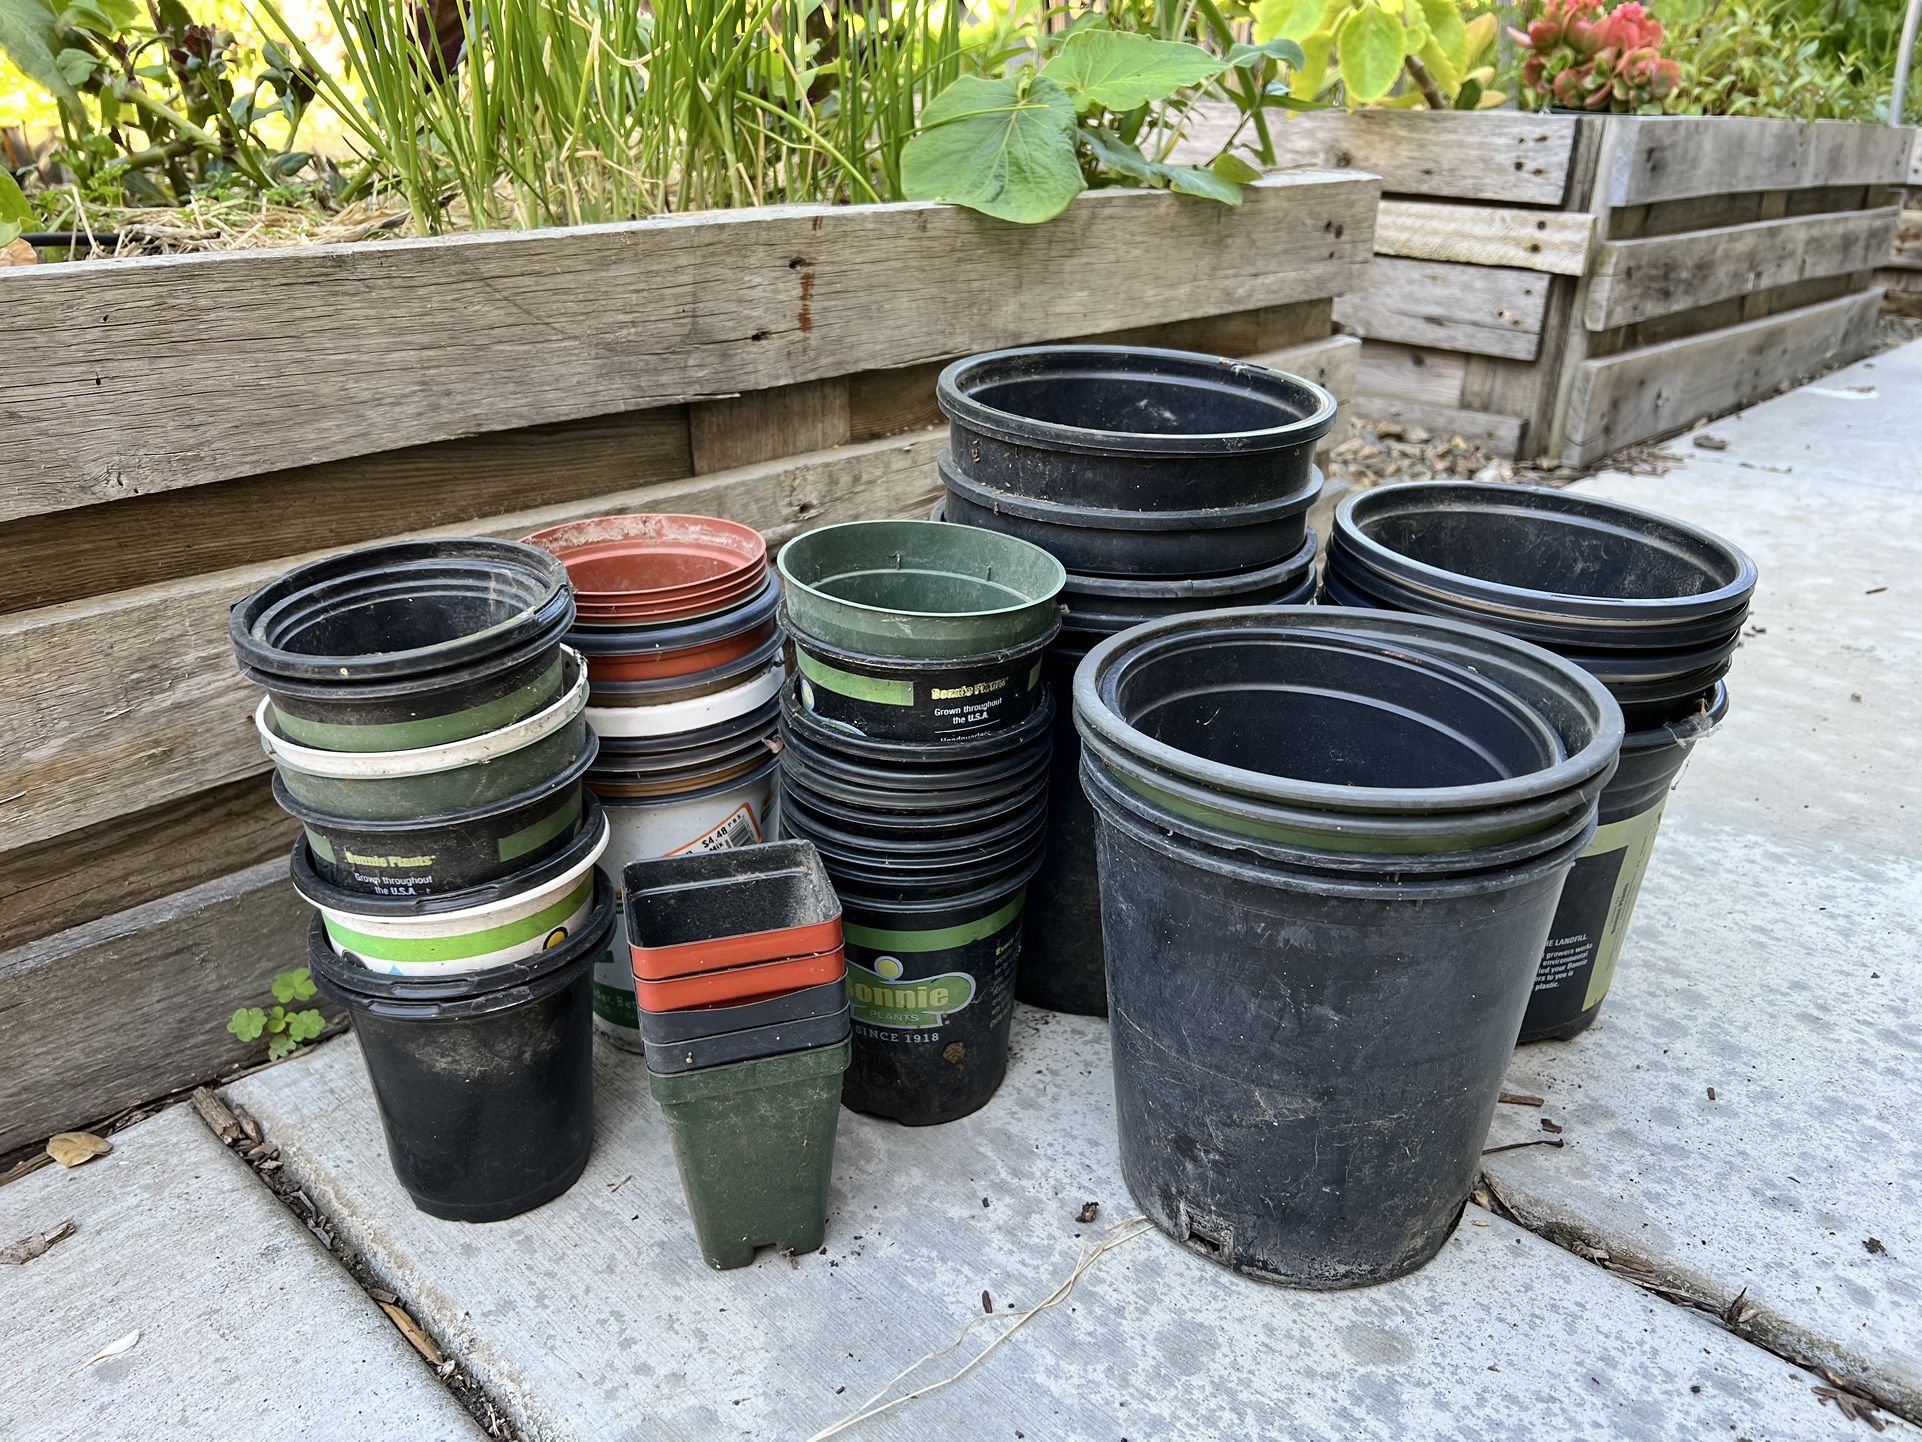 Planting Pots - Various Sizes (ranging From 4 Inches To 1 Gallons)